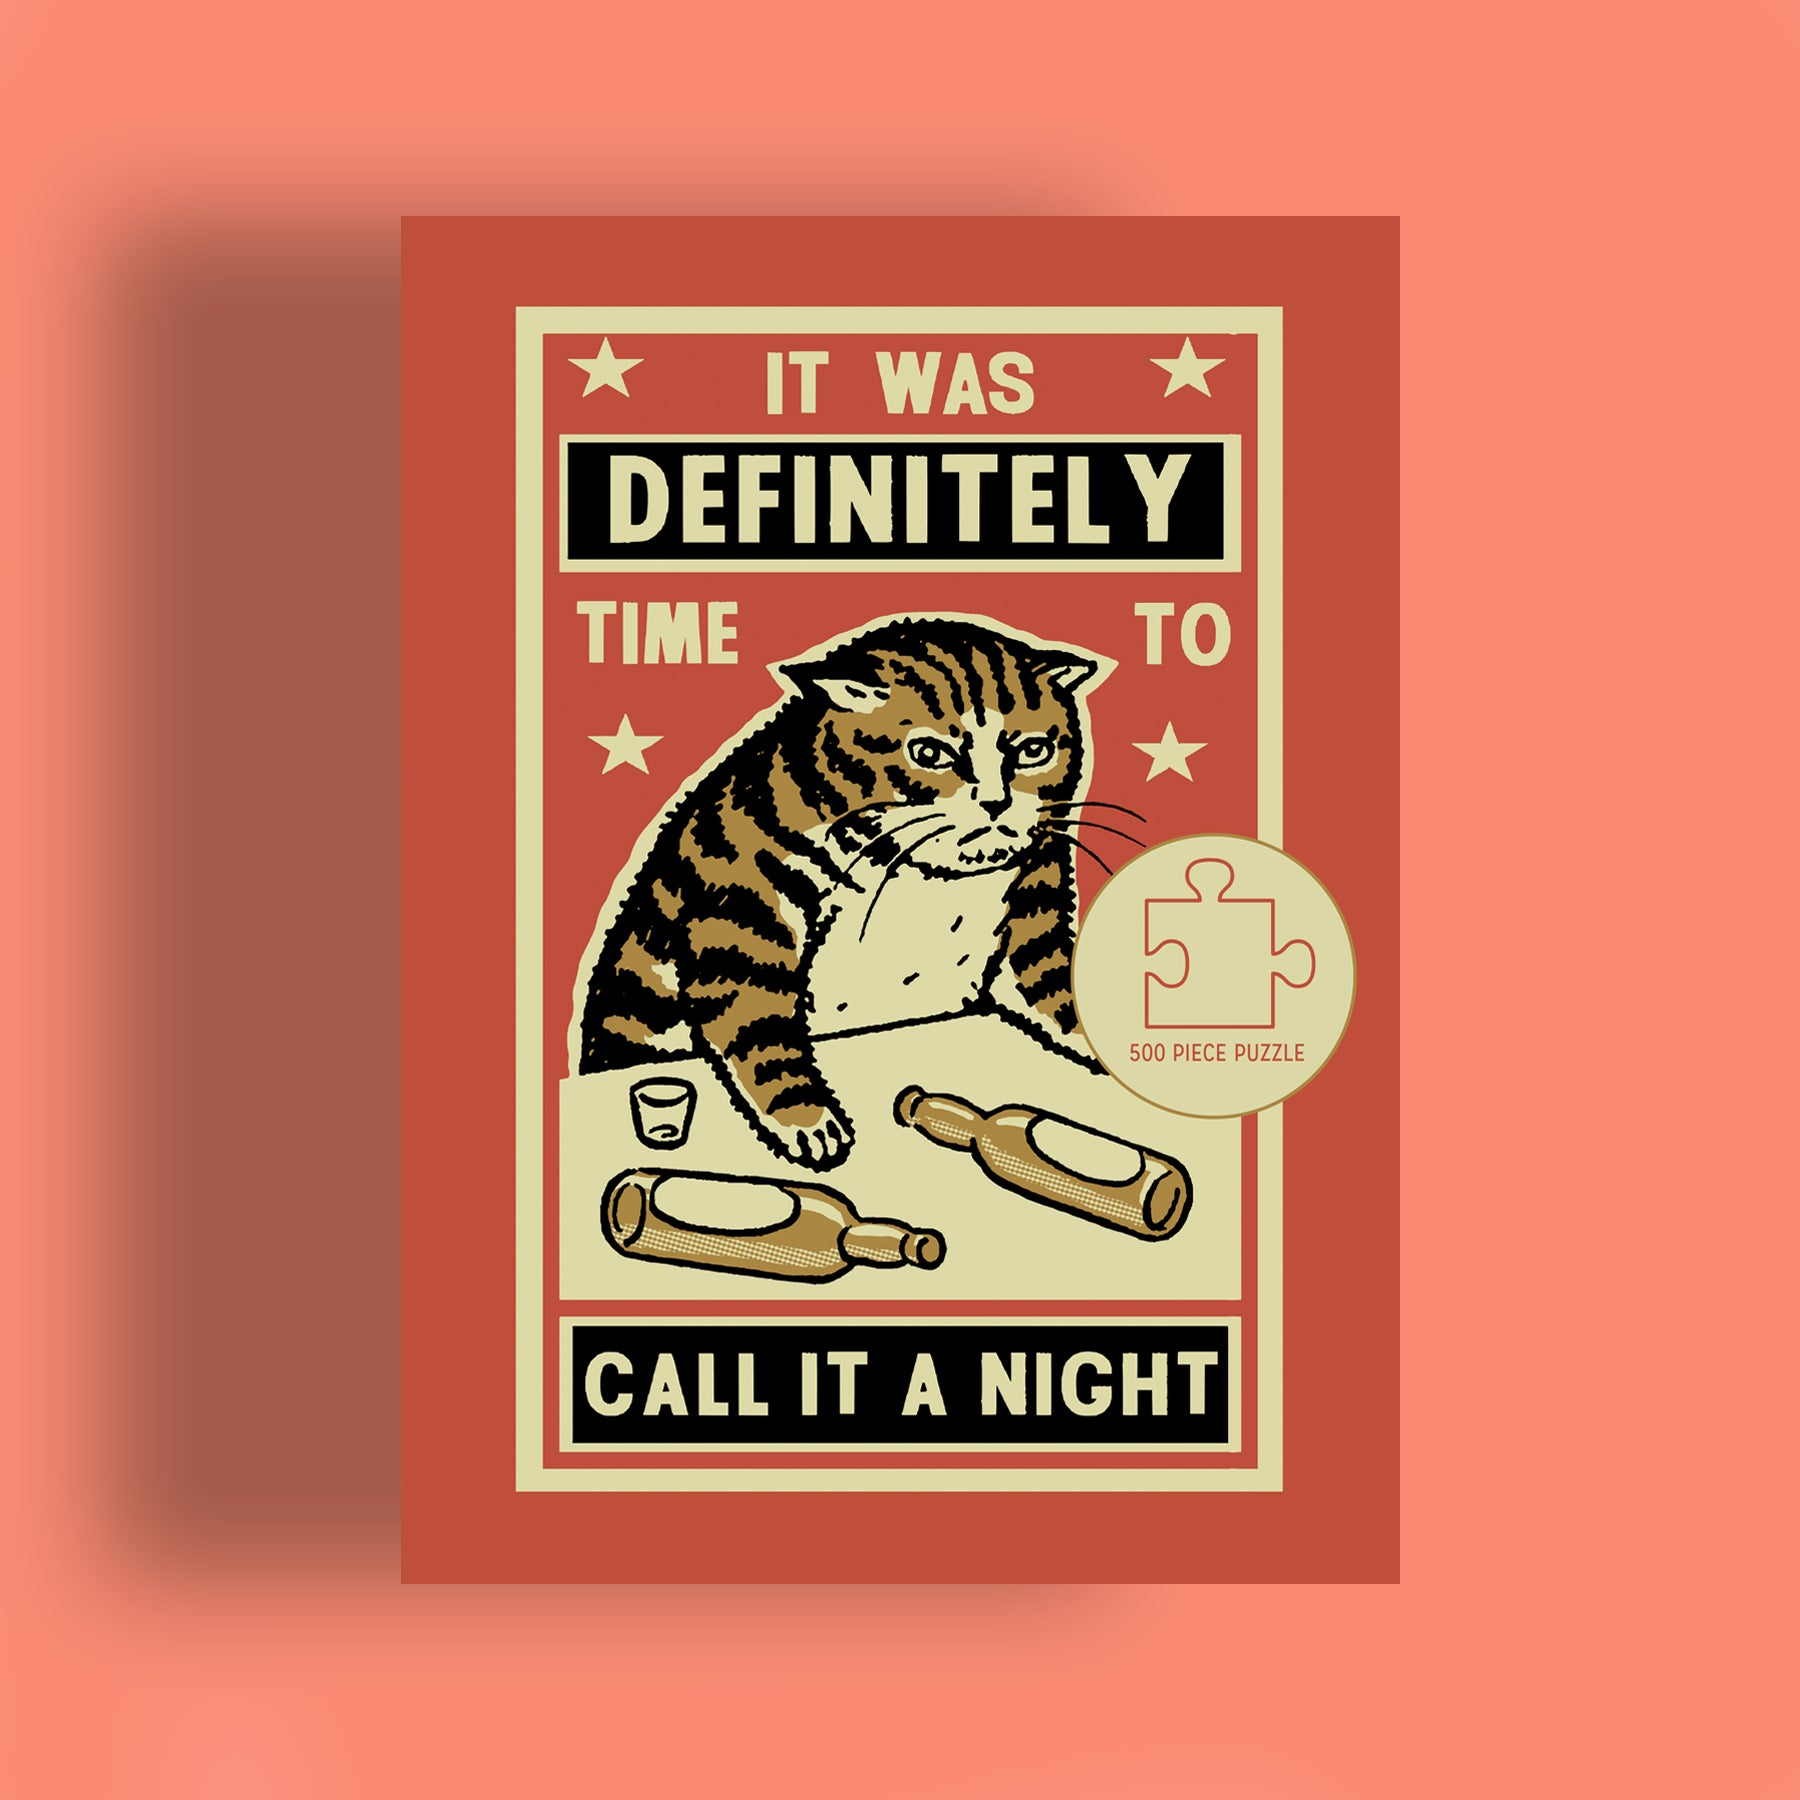 Drunk Cats - "Time to Call It" Puzzle